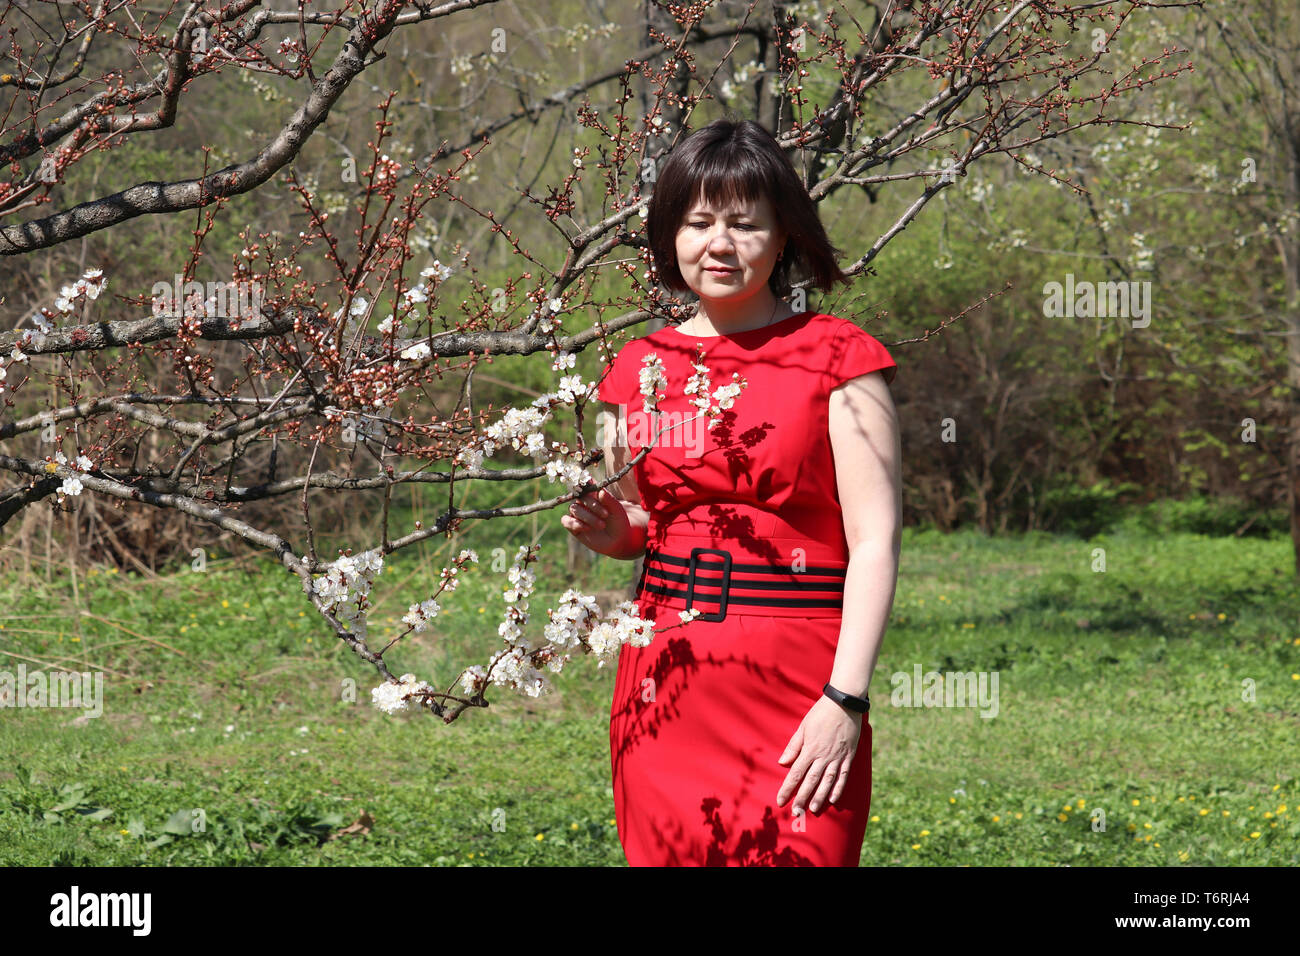 Cherry blossom in spring garden. Happy woman in red dress stands near the sakura tree and smells the flowers Stock Photo